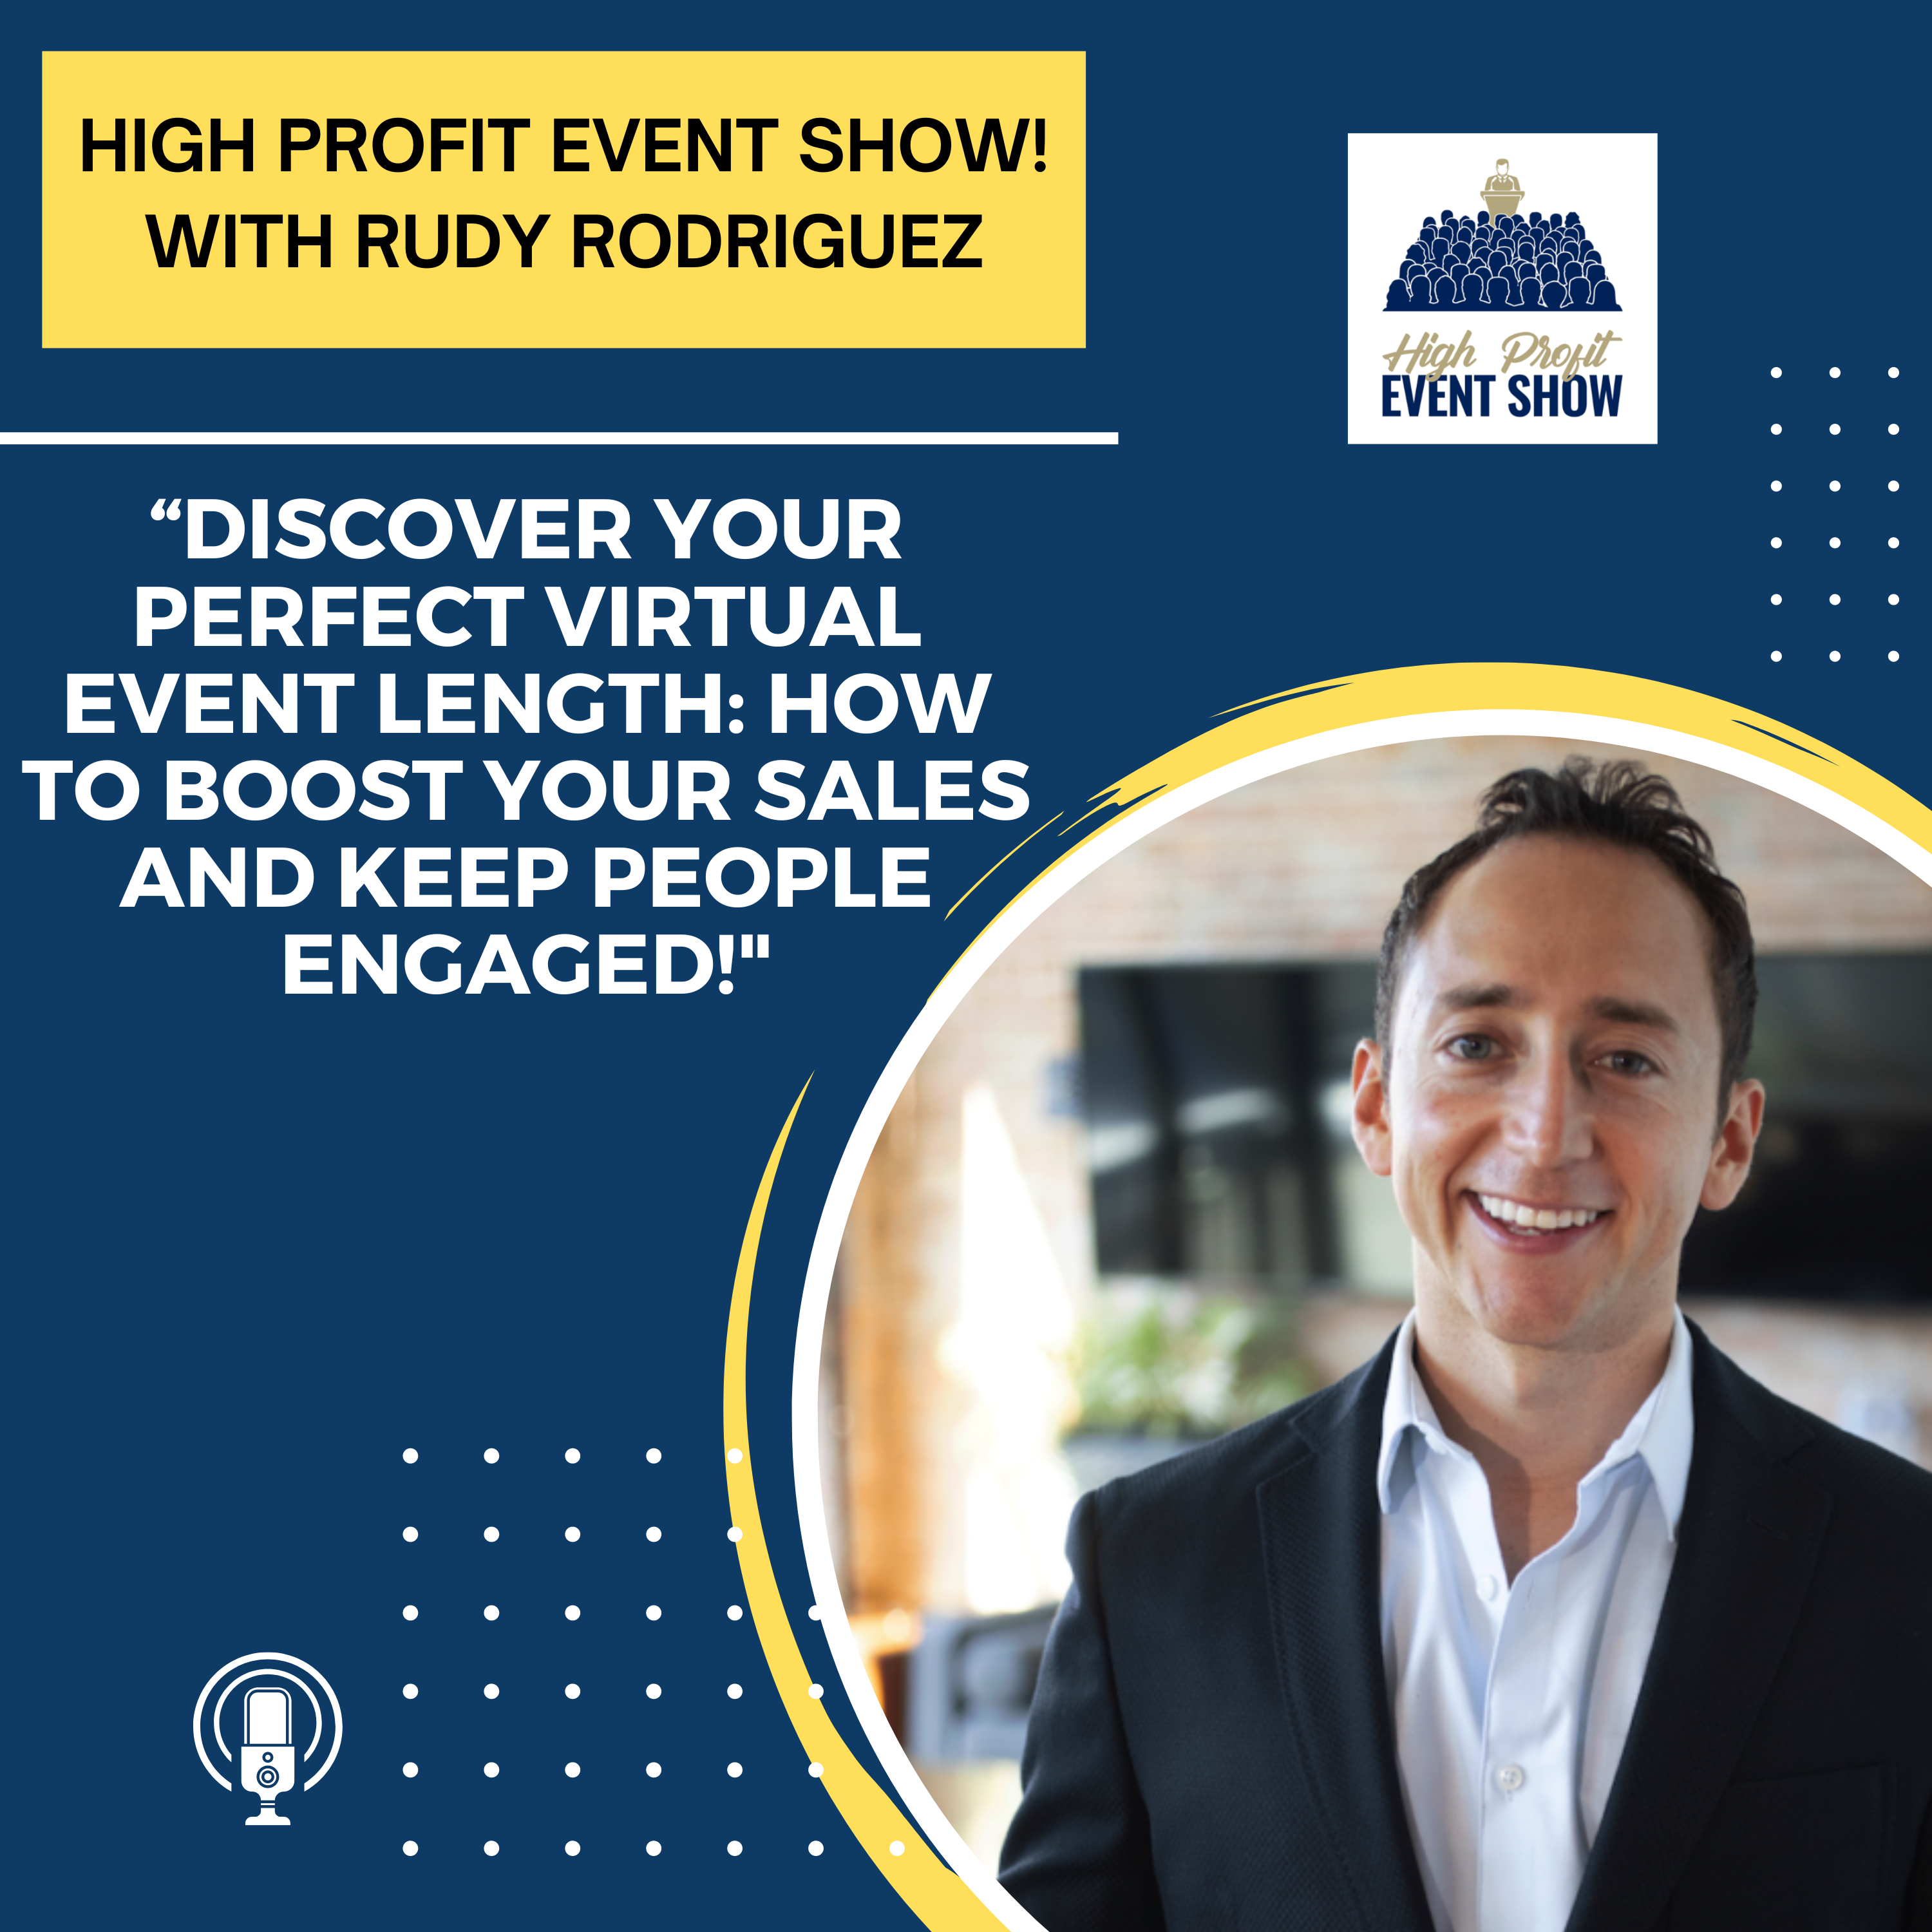 Discover Your Perfect Virtual Event Length: How to Boost Your Sales and Keep People Engaged!